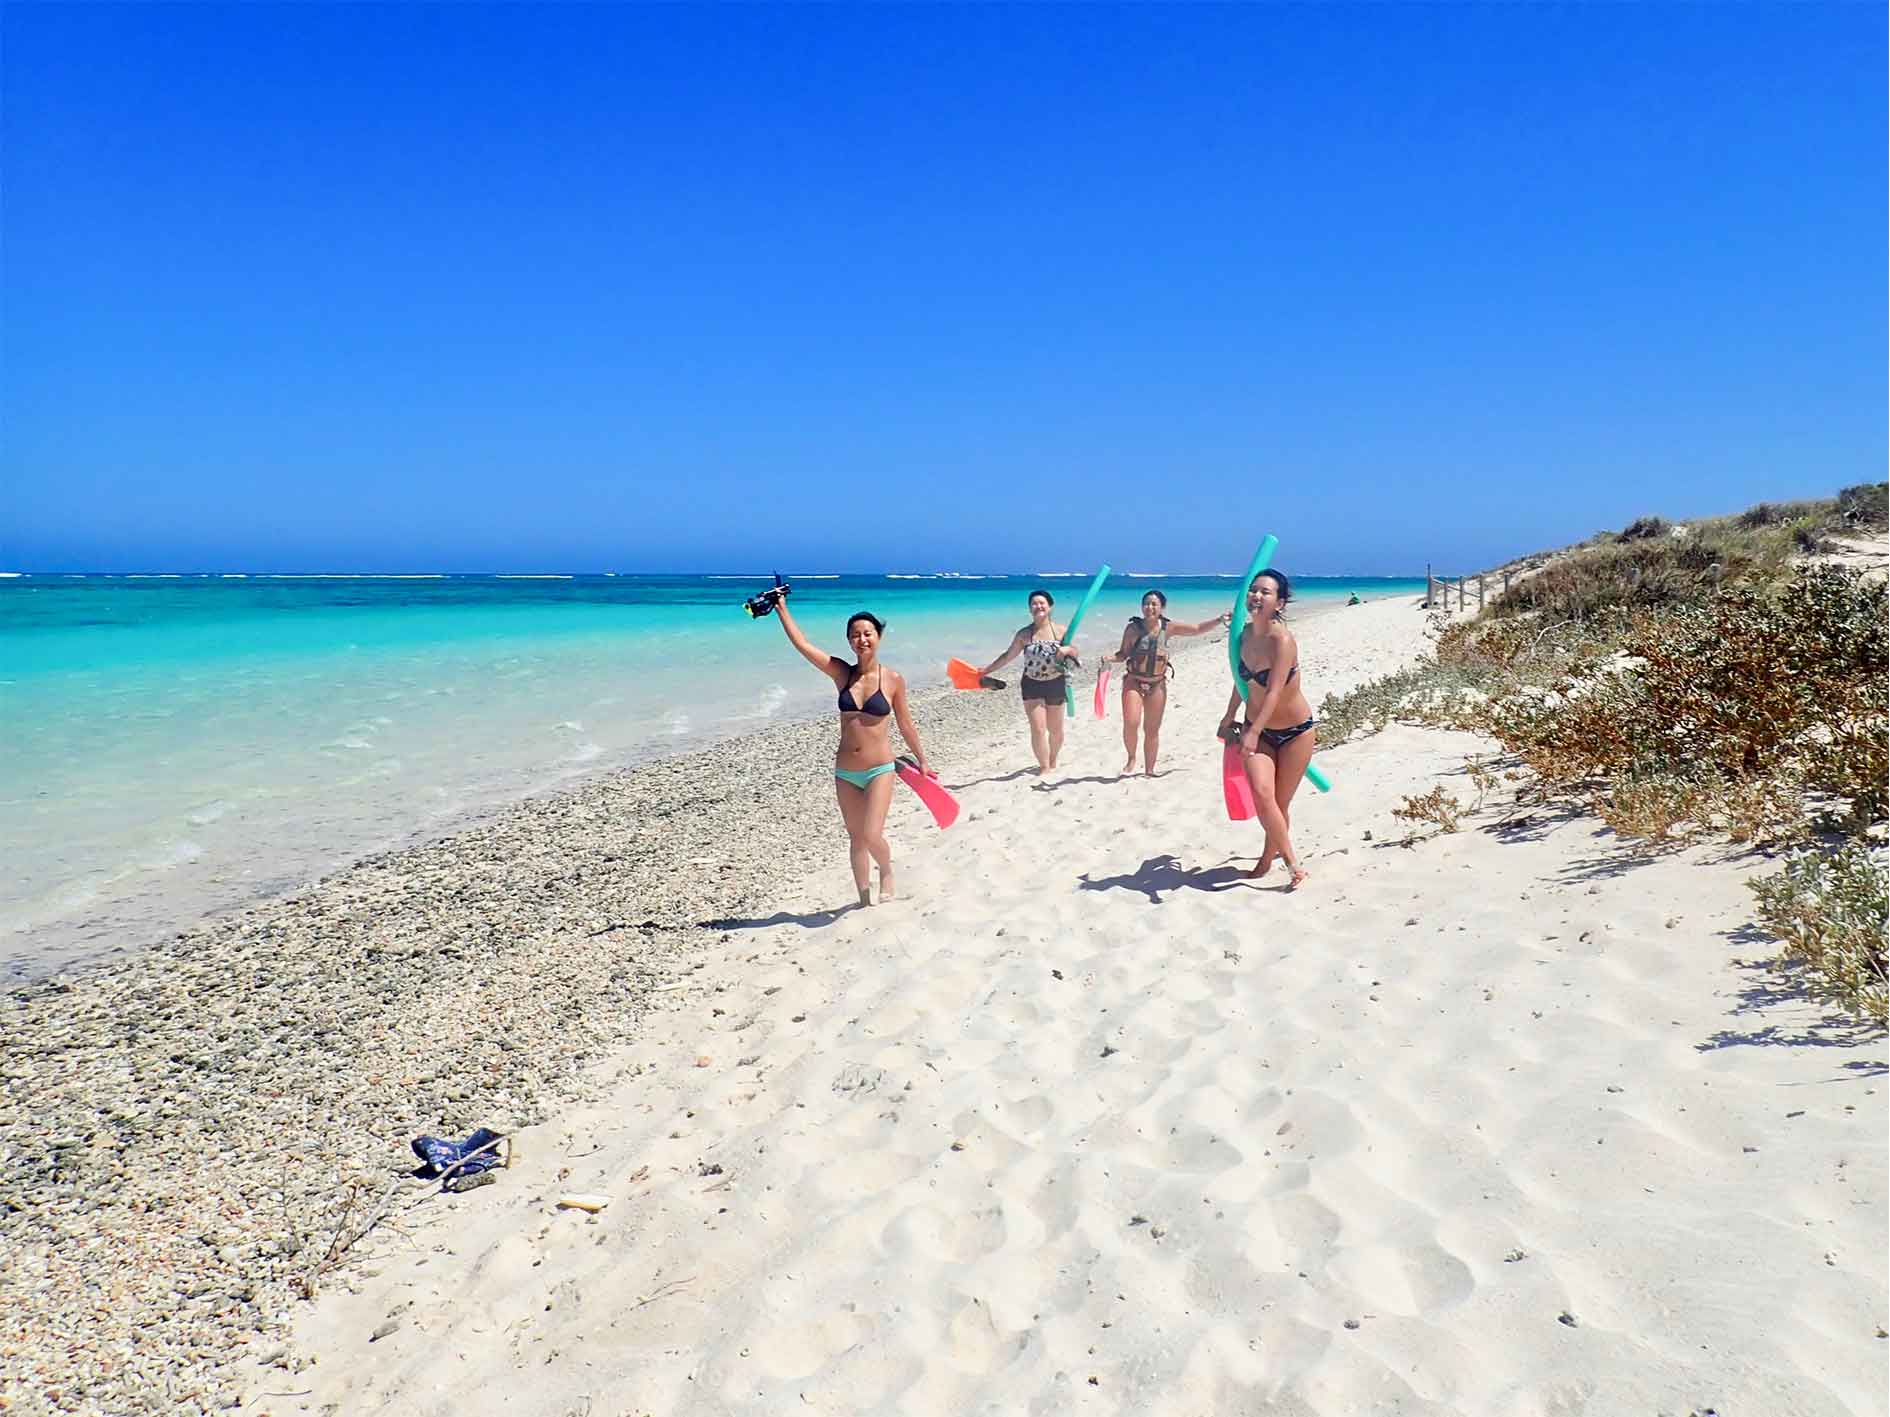 Group of snorkellers in turquoise water, ready for amazing snorkelling experience on Turquoise Bay Snorkel Tour, Ningaloo Reef, Exmouth, Western Australia